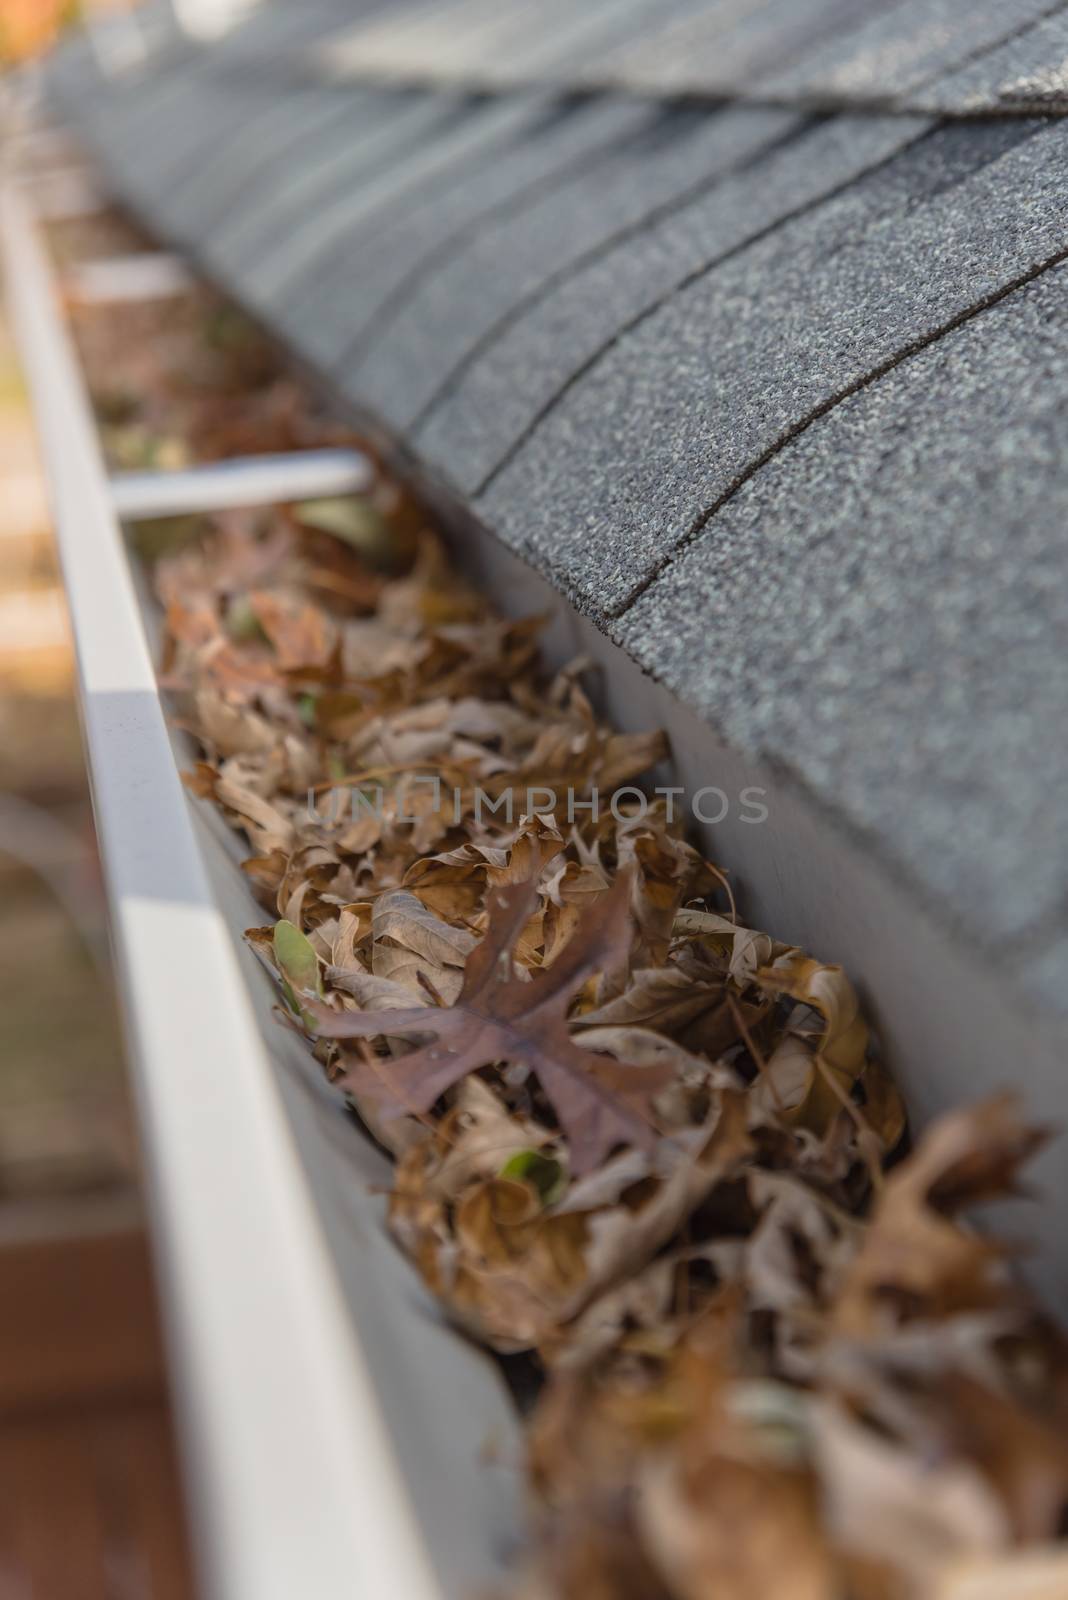 Blocked gutter full of autumn dried leaves and debris clogging in Texas, America by trongnguyen